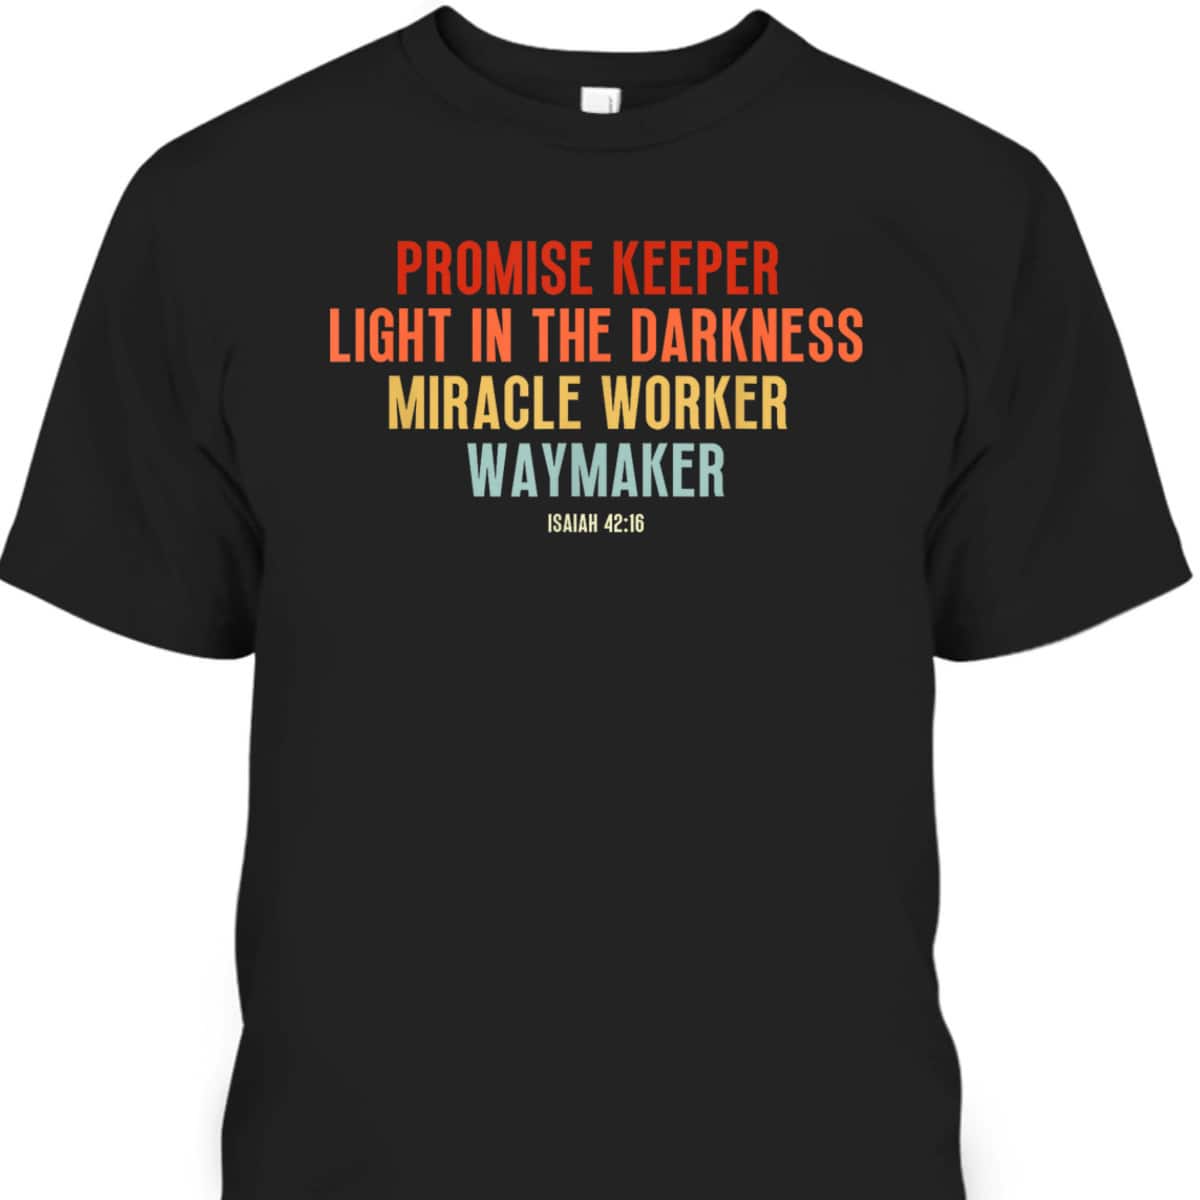 Retro Christian Faith Waymaker T-Shirt Promise Keeper Miracle Worker